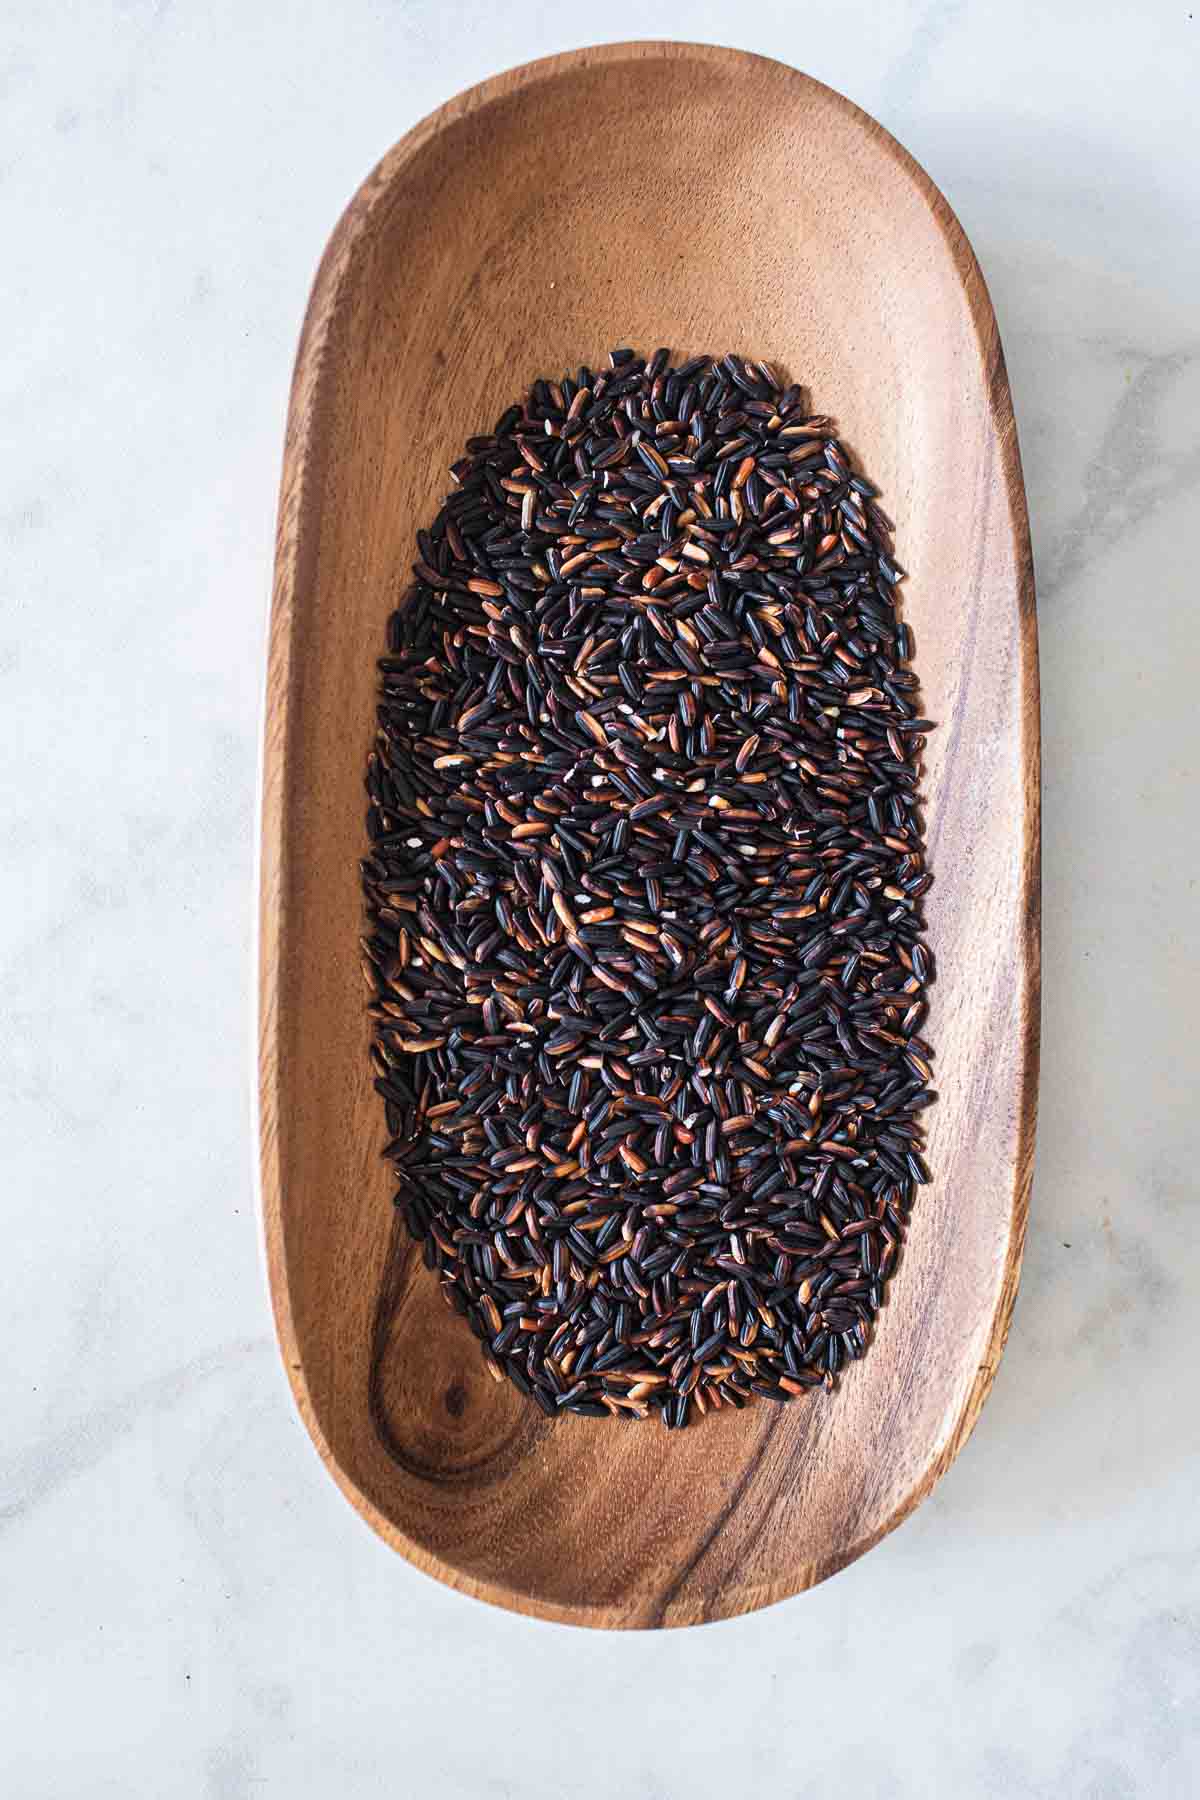 Black rice in a wooden bowl. 